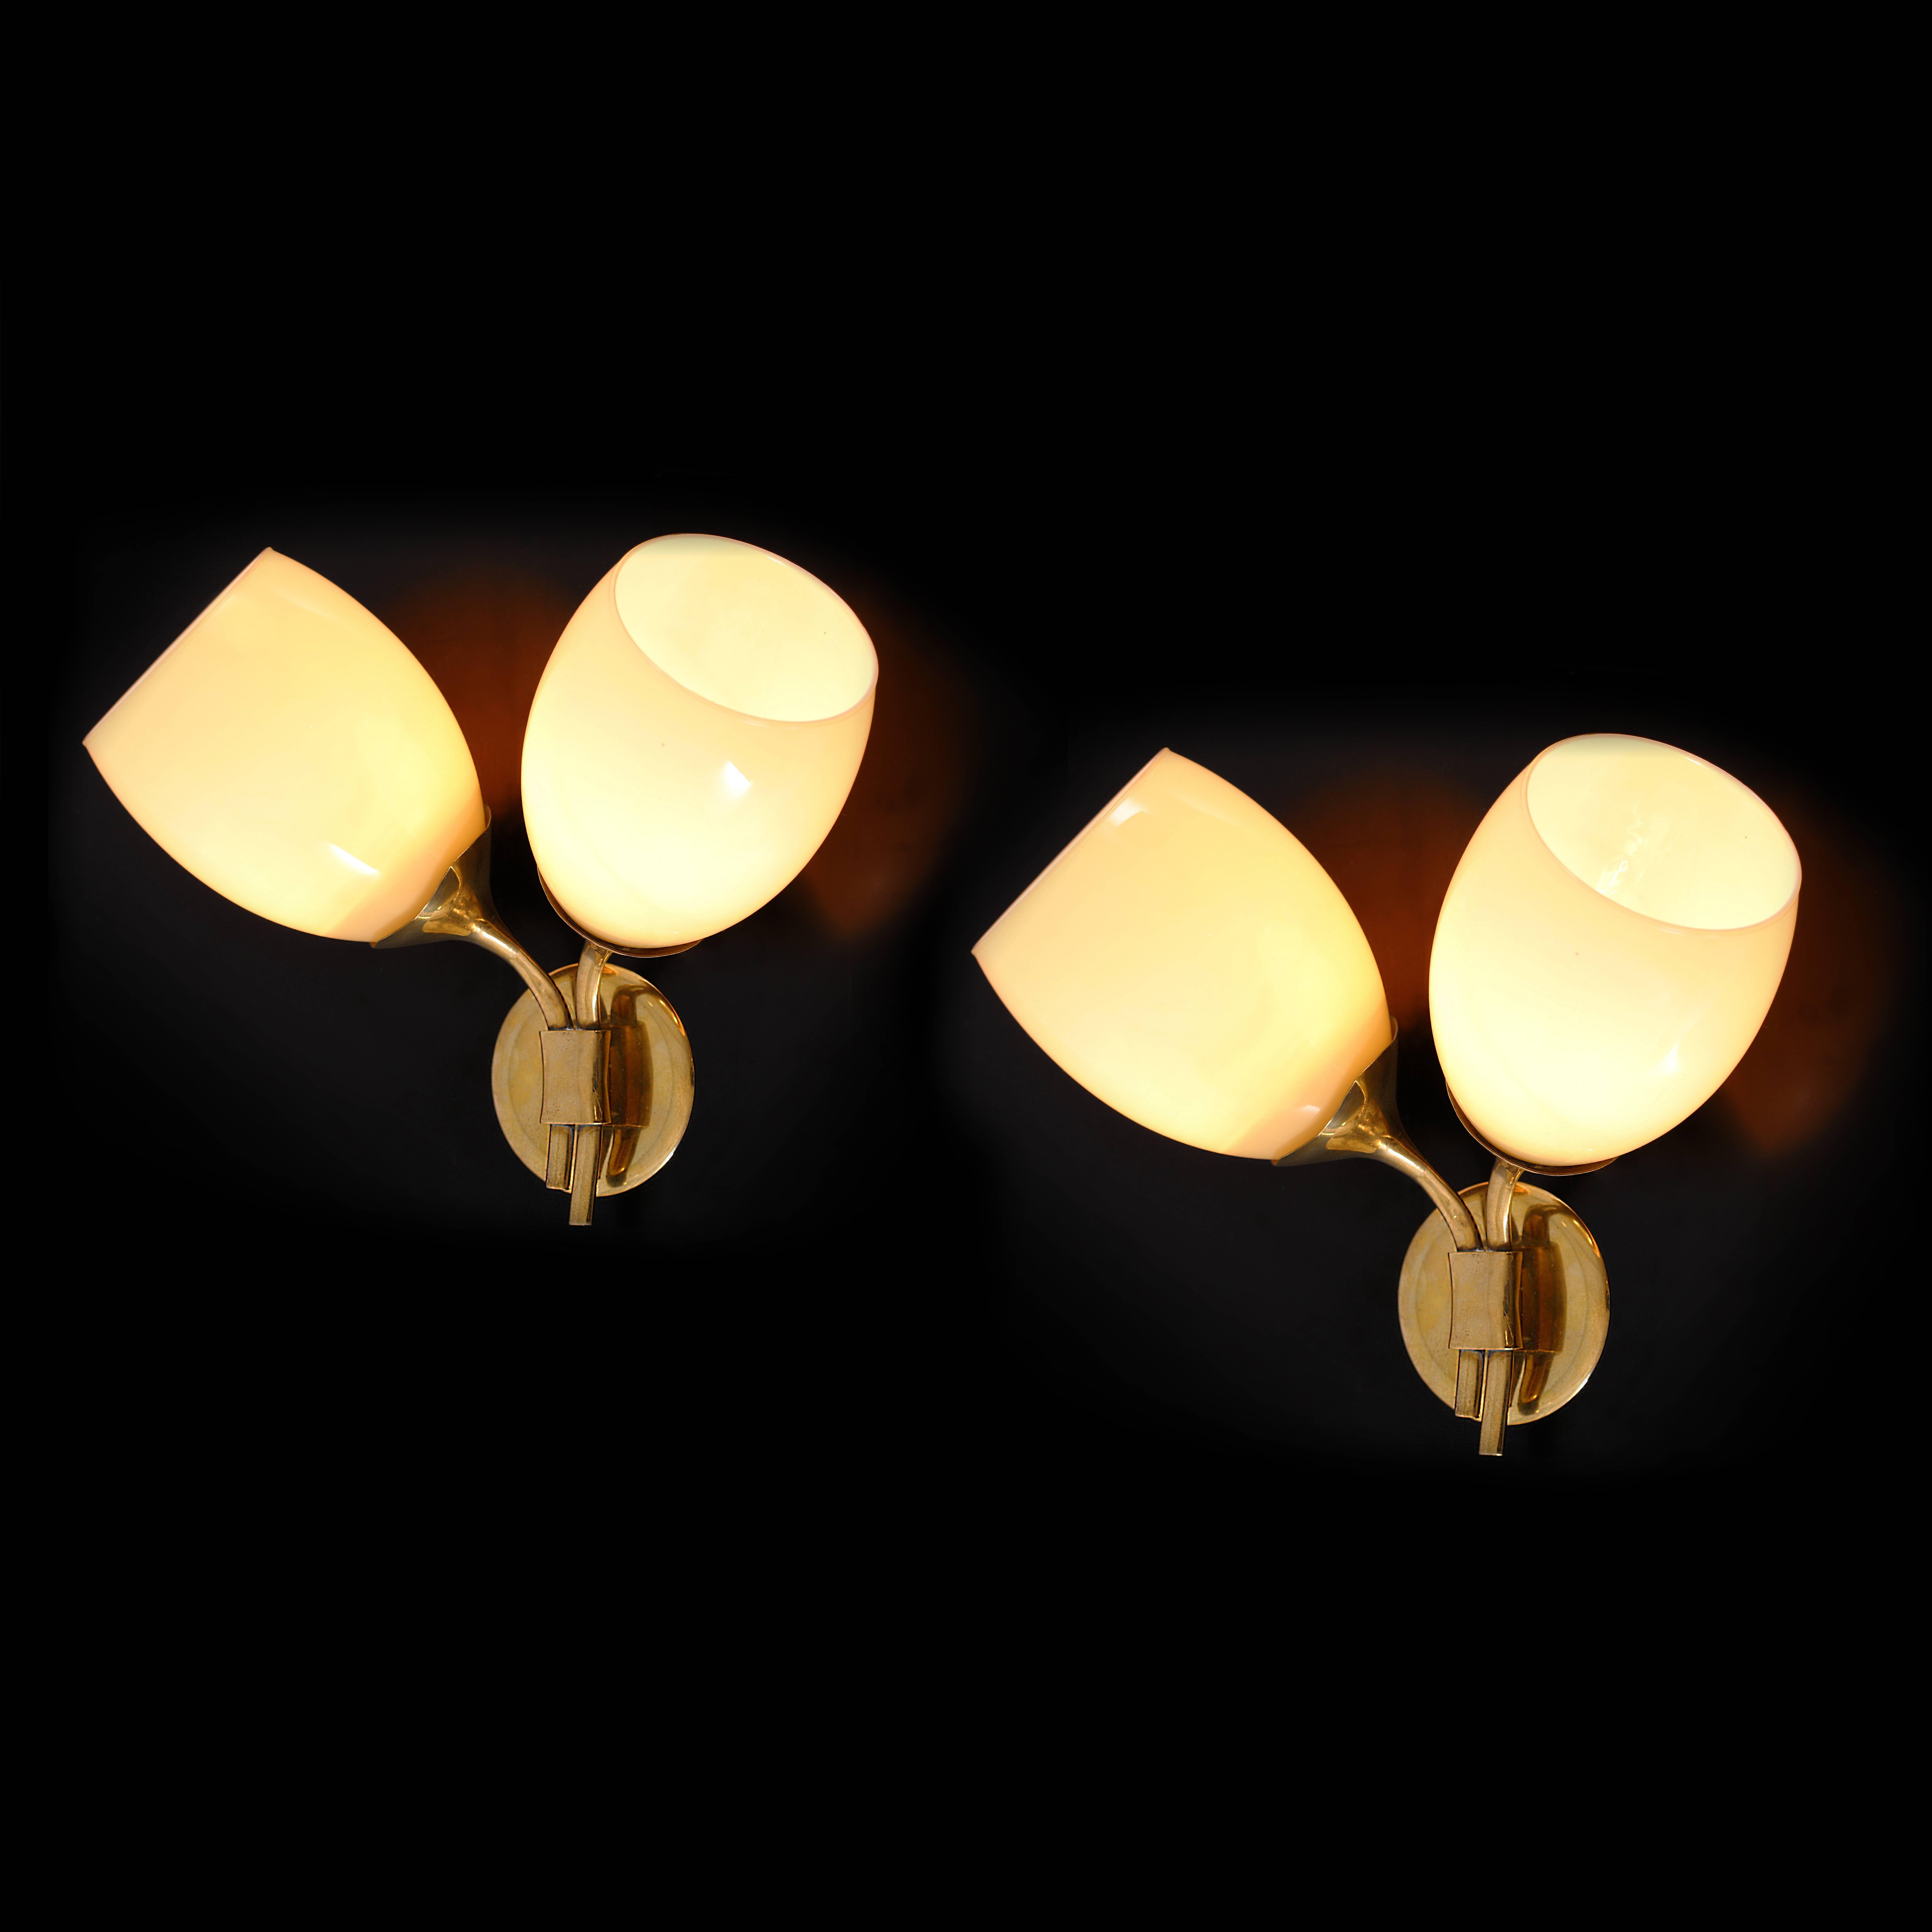 1950s Paavo Tynell Double-Glass Sconces for Taito, Oy. A rare and sculptural pair of lamps executed in brass and hand blown opaline glass. Fabricated in Finland, circa late 1940s or early 1950s.

Professionally updated wiring for US electrical, each